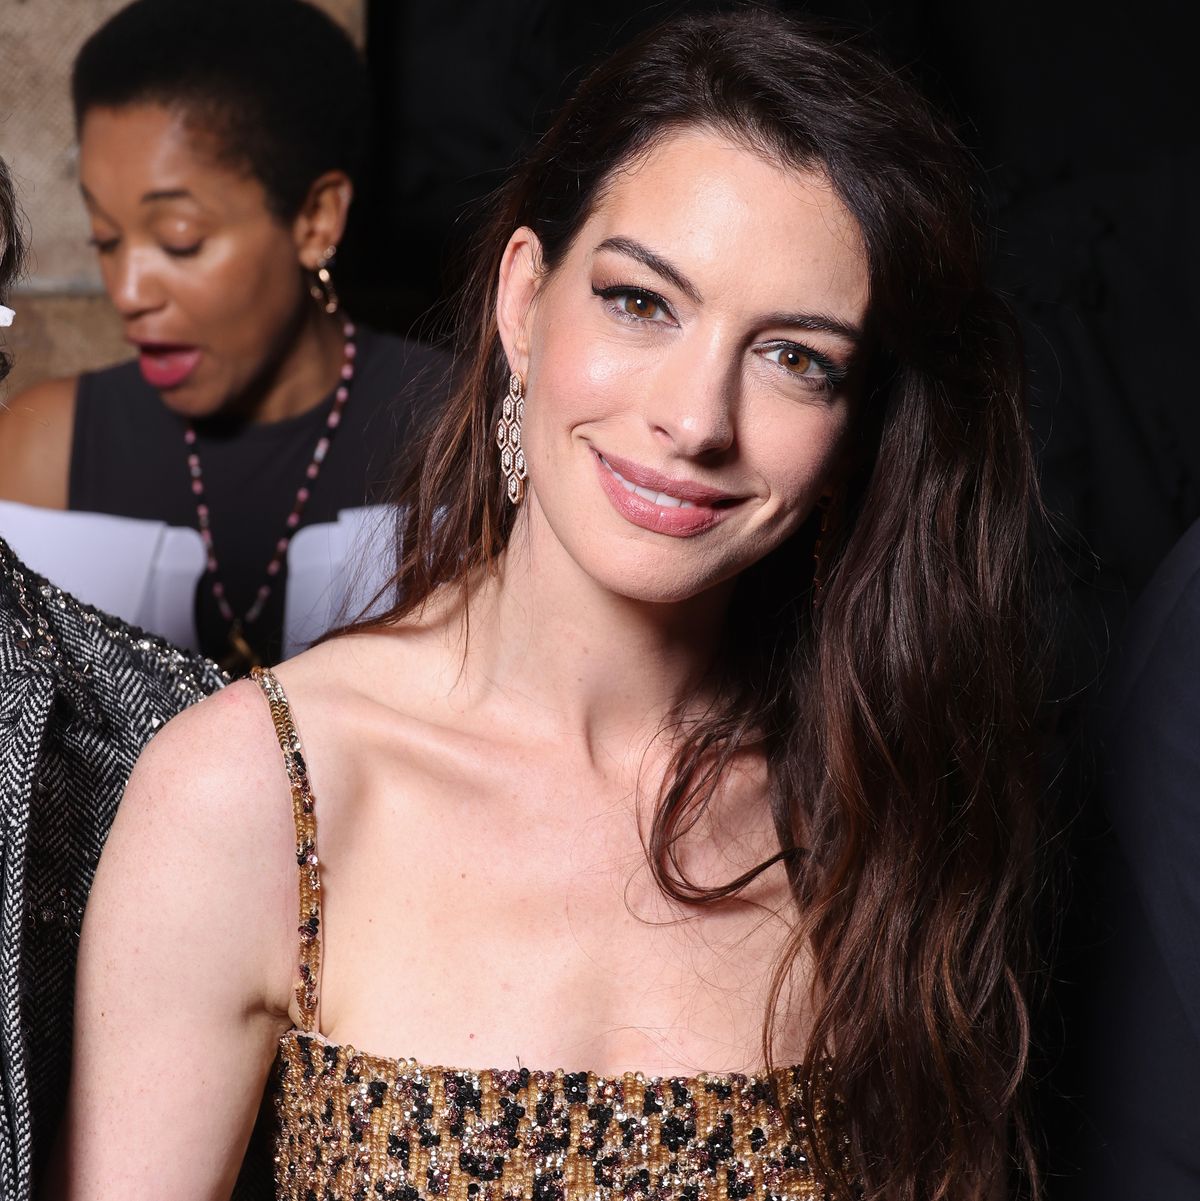 paris, france january 25 editorial use only for non editorial use please seek approval from fashion house anne hathaway attends the valentino haute couture spring summer 2023 show as part of paris fashion week on january 25, 2023 in paris, france photo by pascal le segretaingetty images